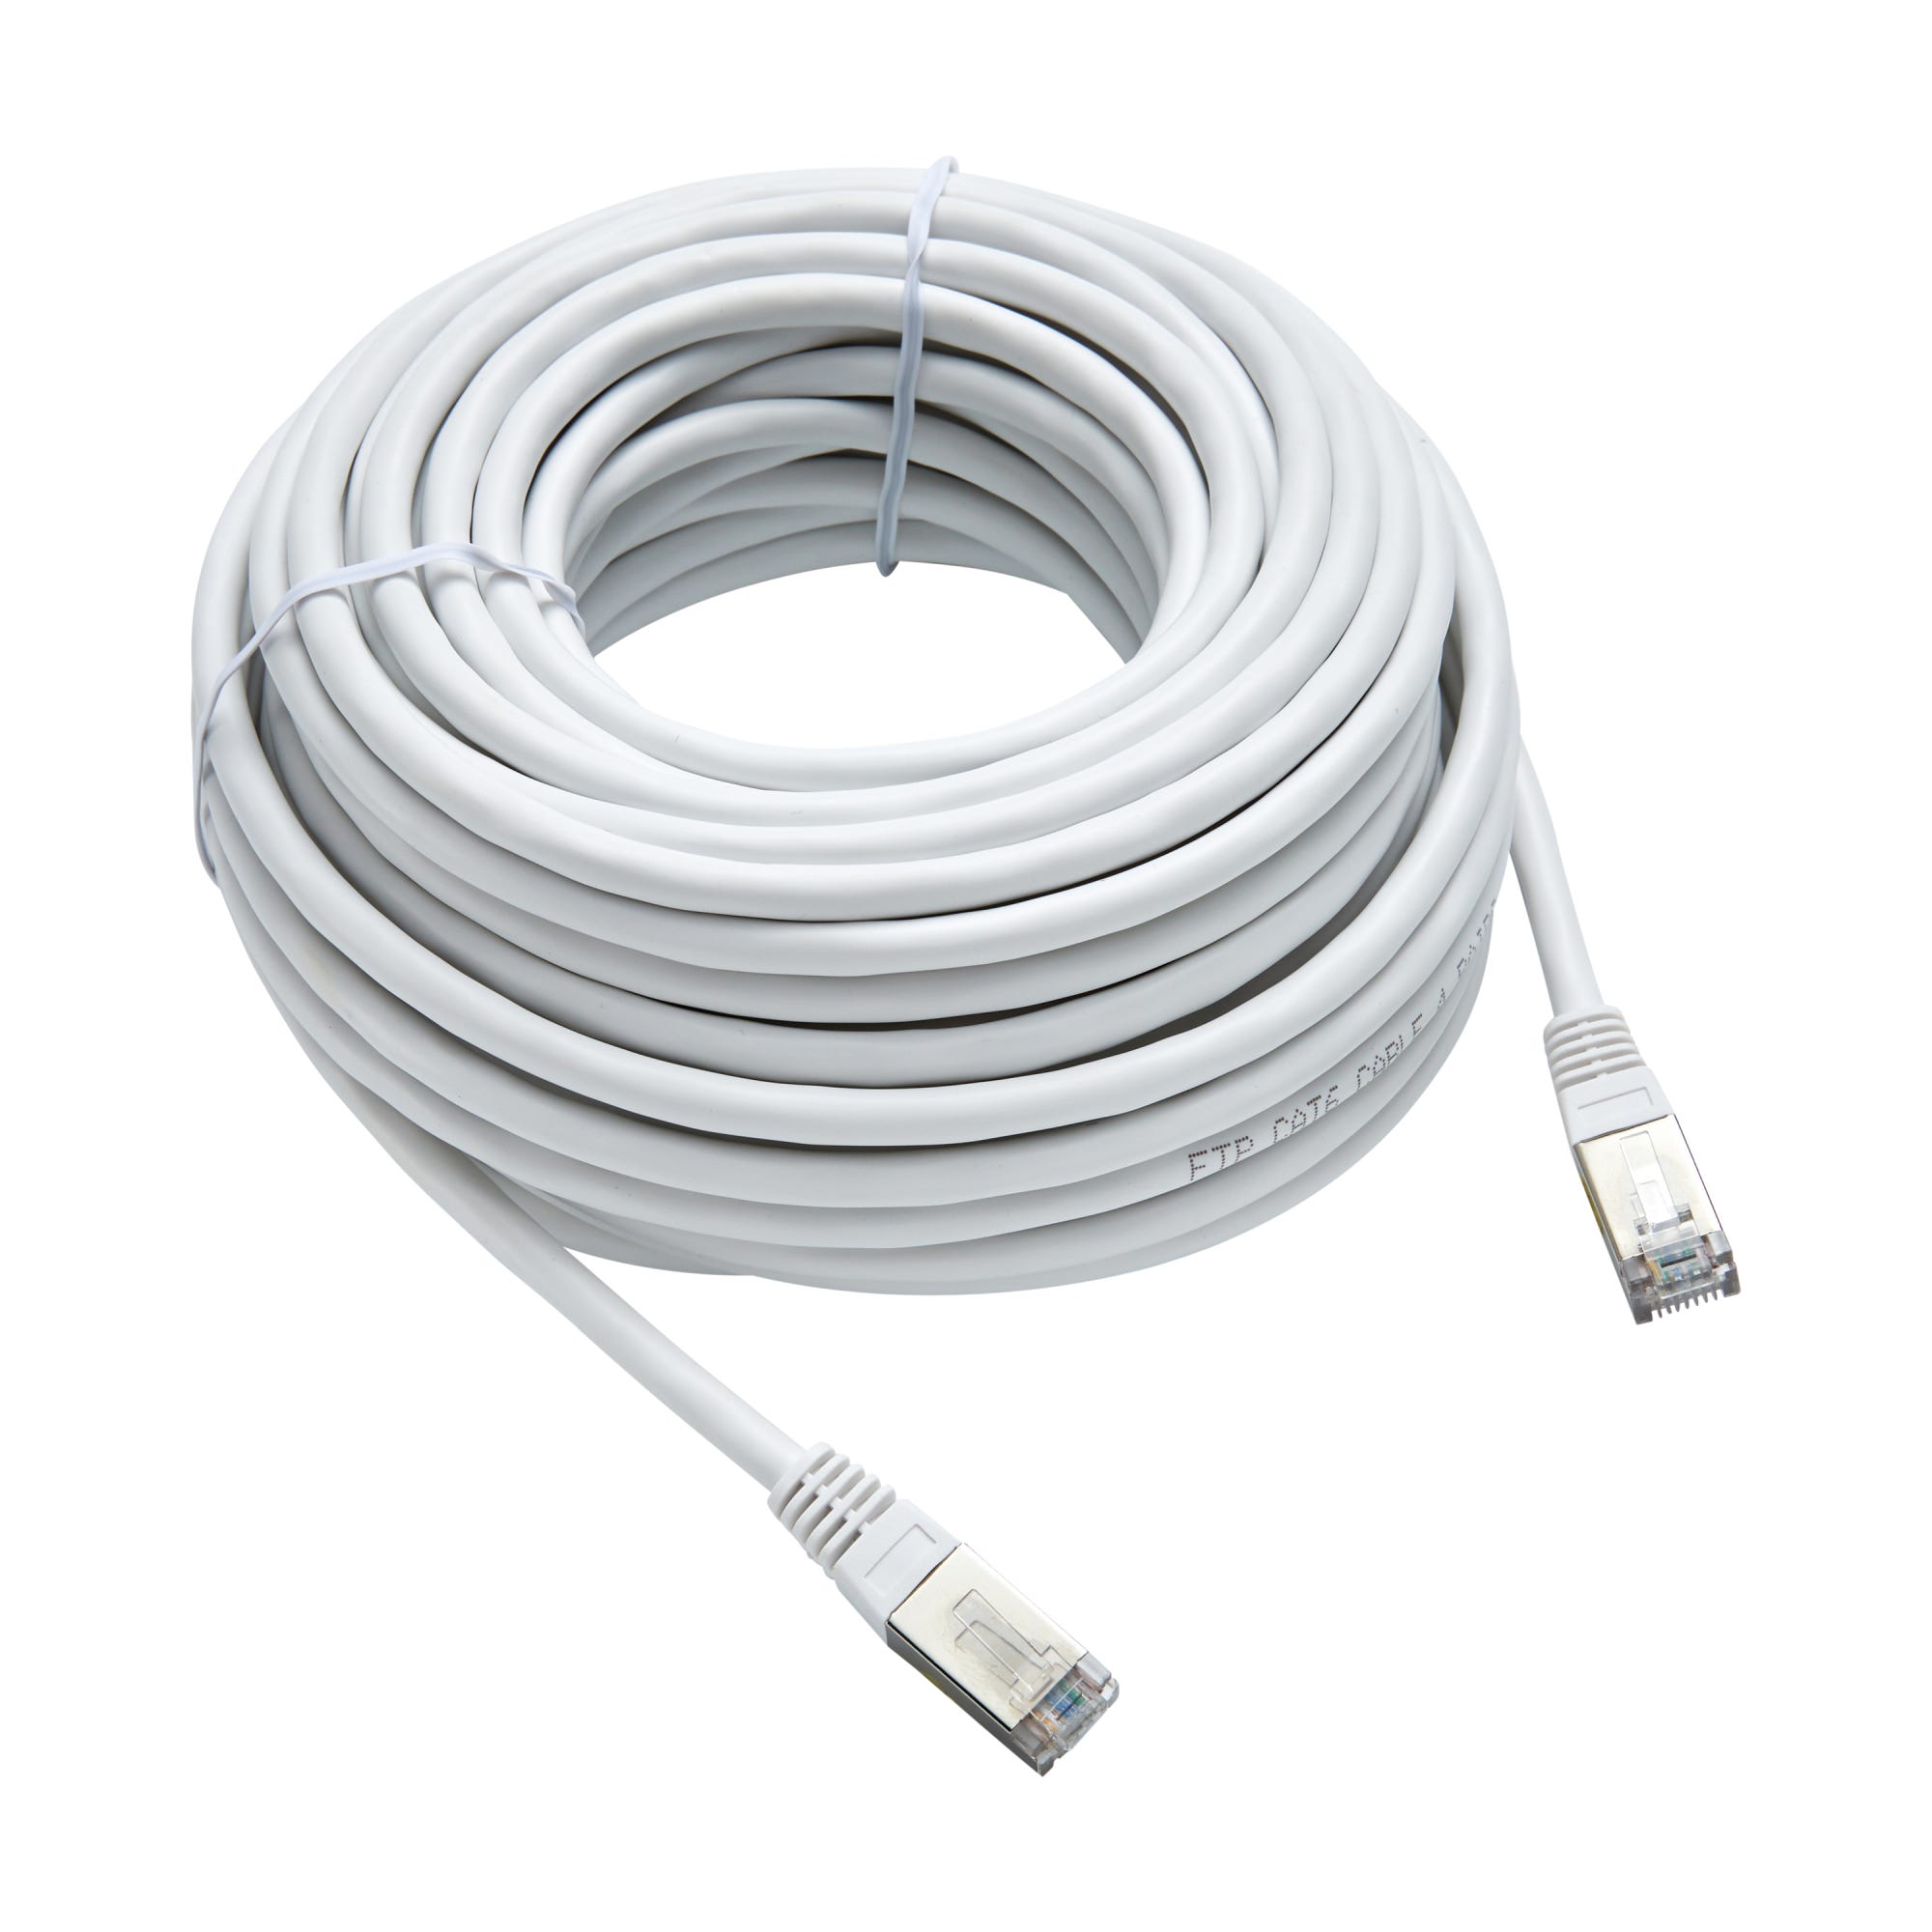 Cable real E-NET 600-2 (15 m) - Cable RJ45 - LDLC